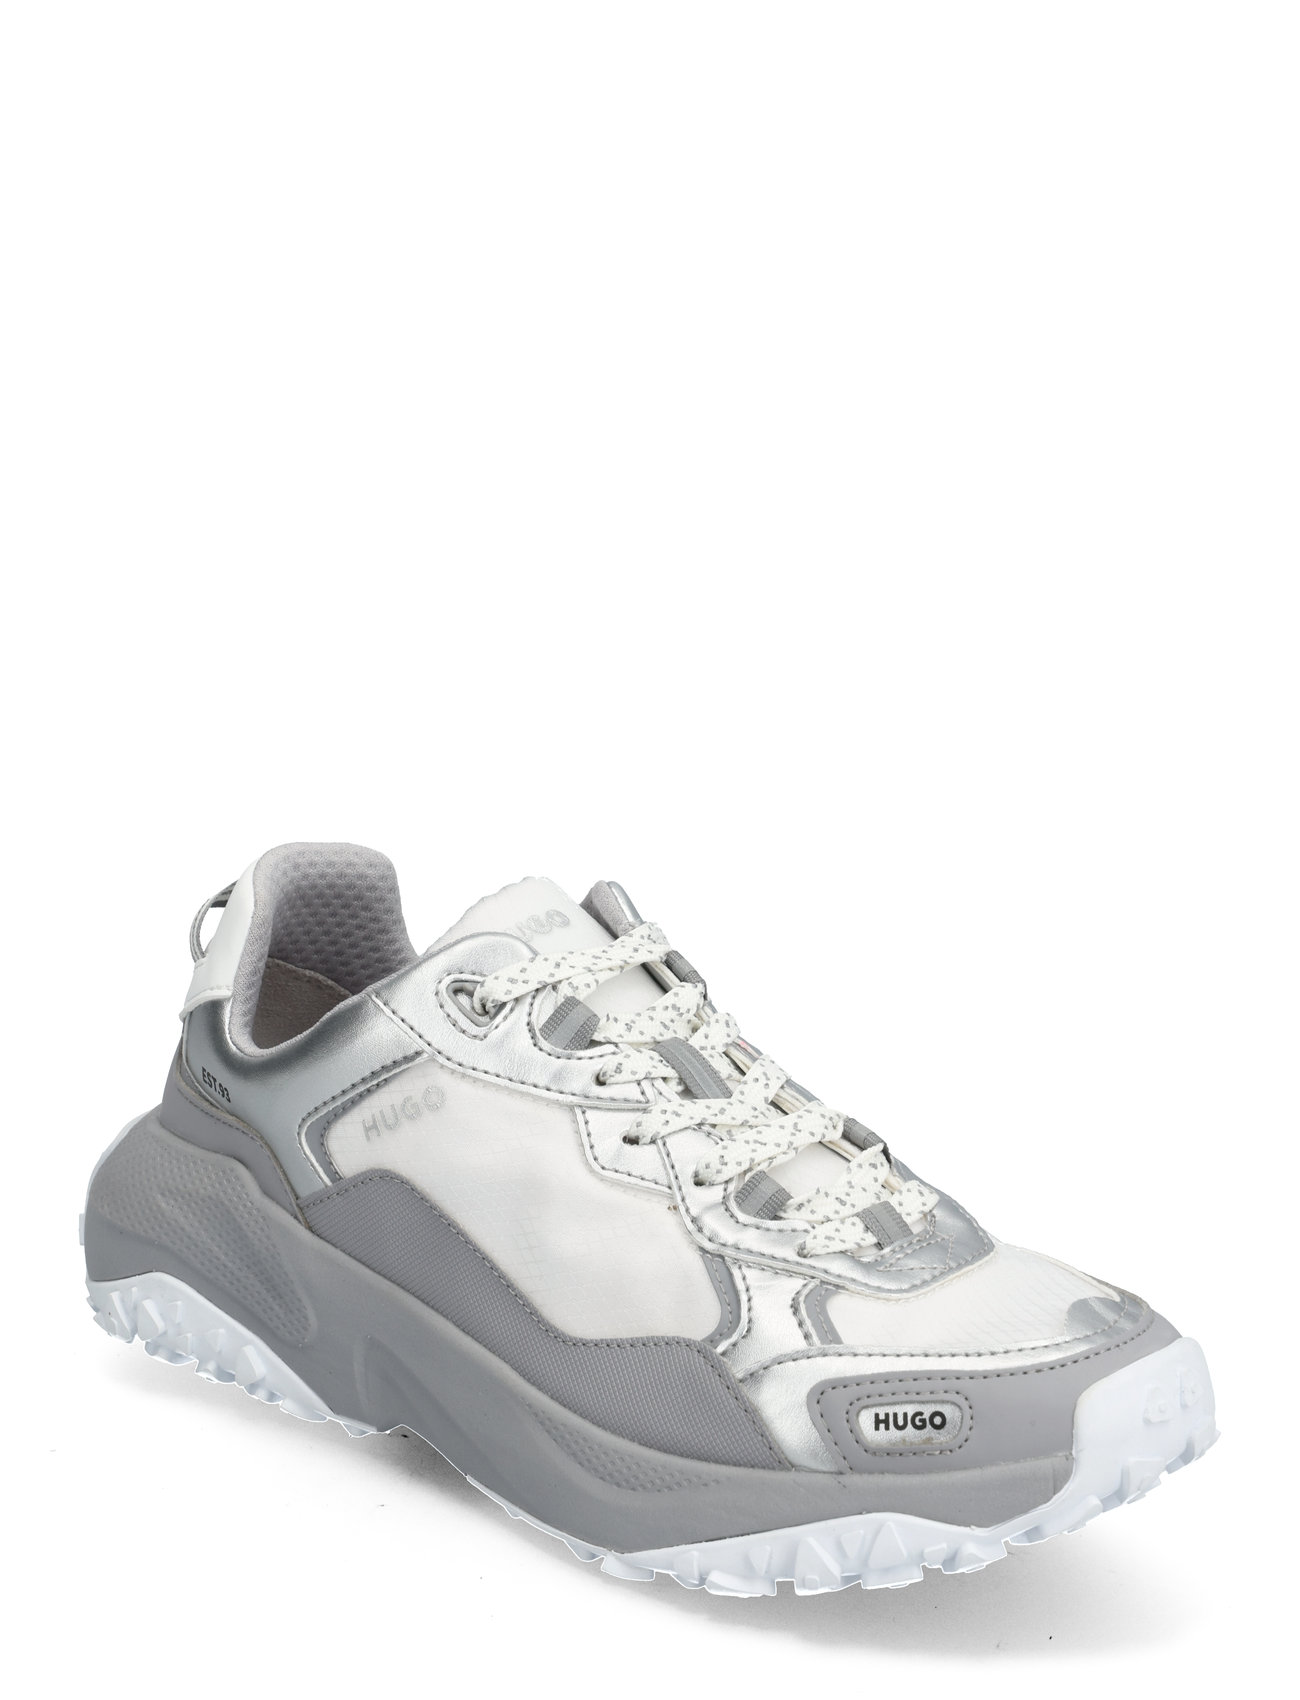 Go1St_Mtpu Shoes Sneakers Chunky Sneakers Silver HUGO